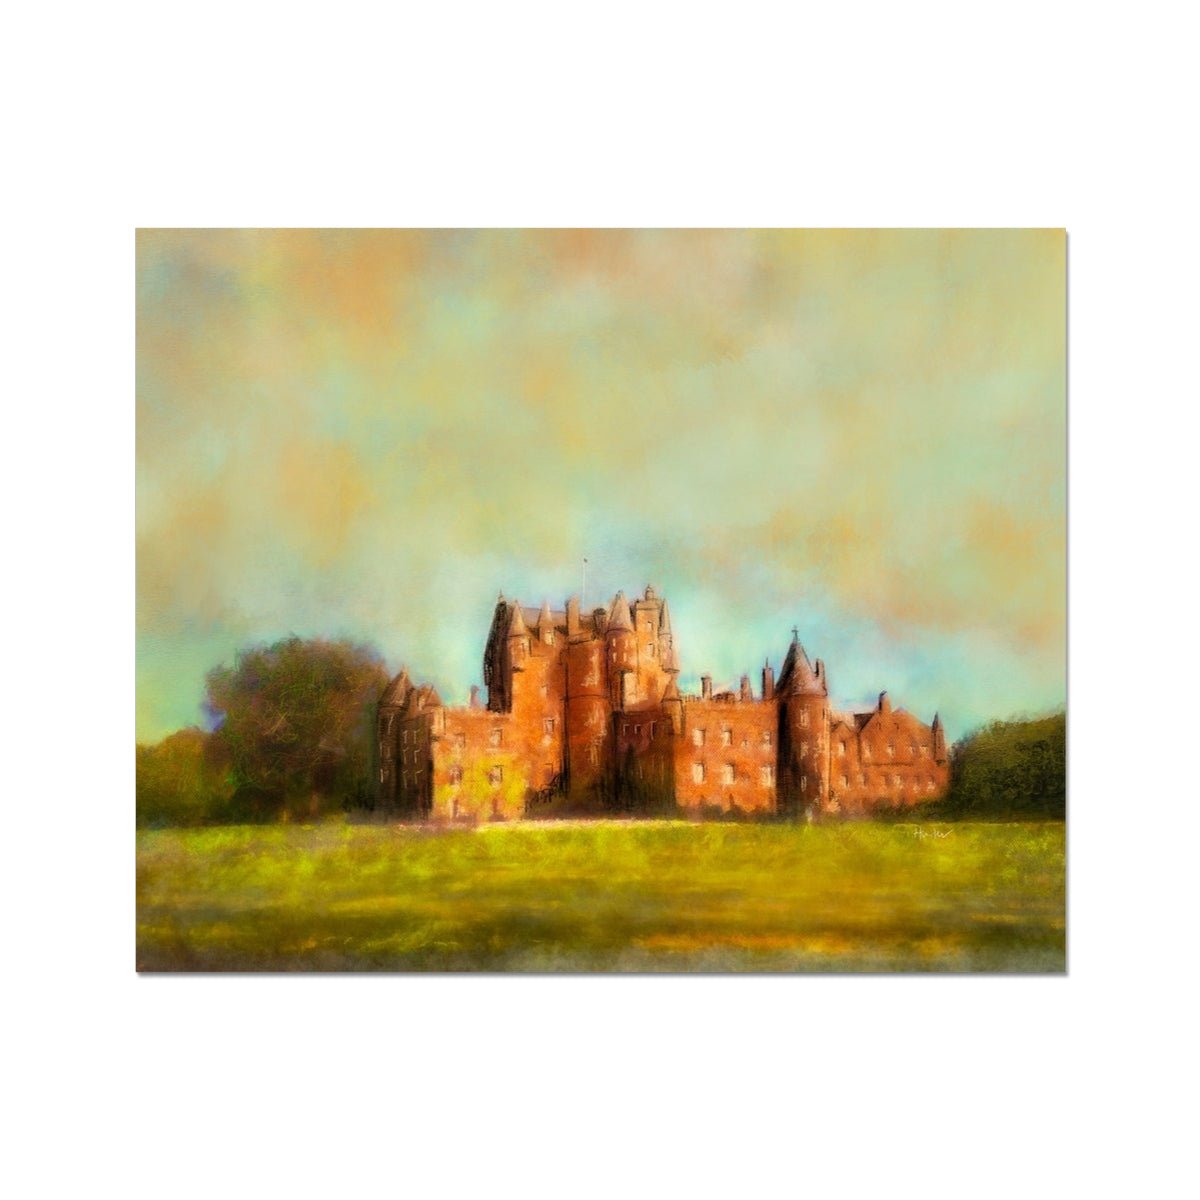 Glamis Castle Painting | Artist Proof Collector Prints From Scotland-Artist Proof Collector Prints-Scottish Castles Art Gallery-20"x16"-Paintings, Prints, Homeware, Art Gifts From Scotland By Scottish Artist Kevin Hunter